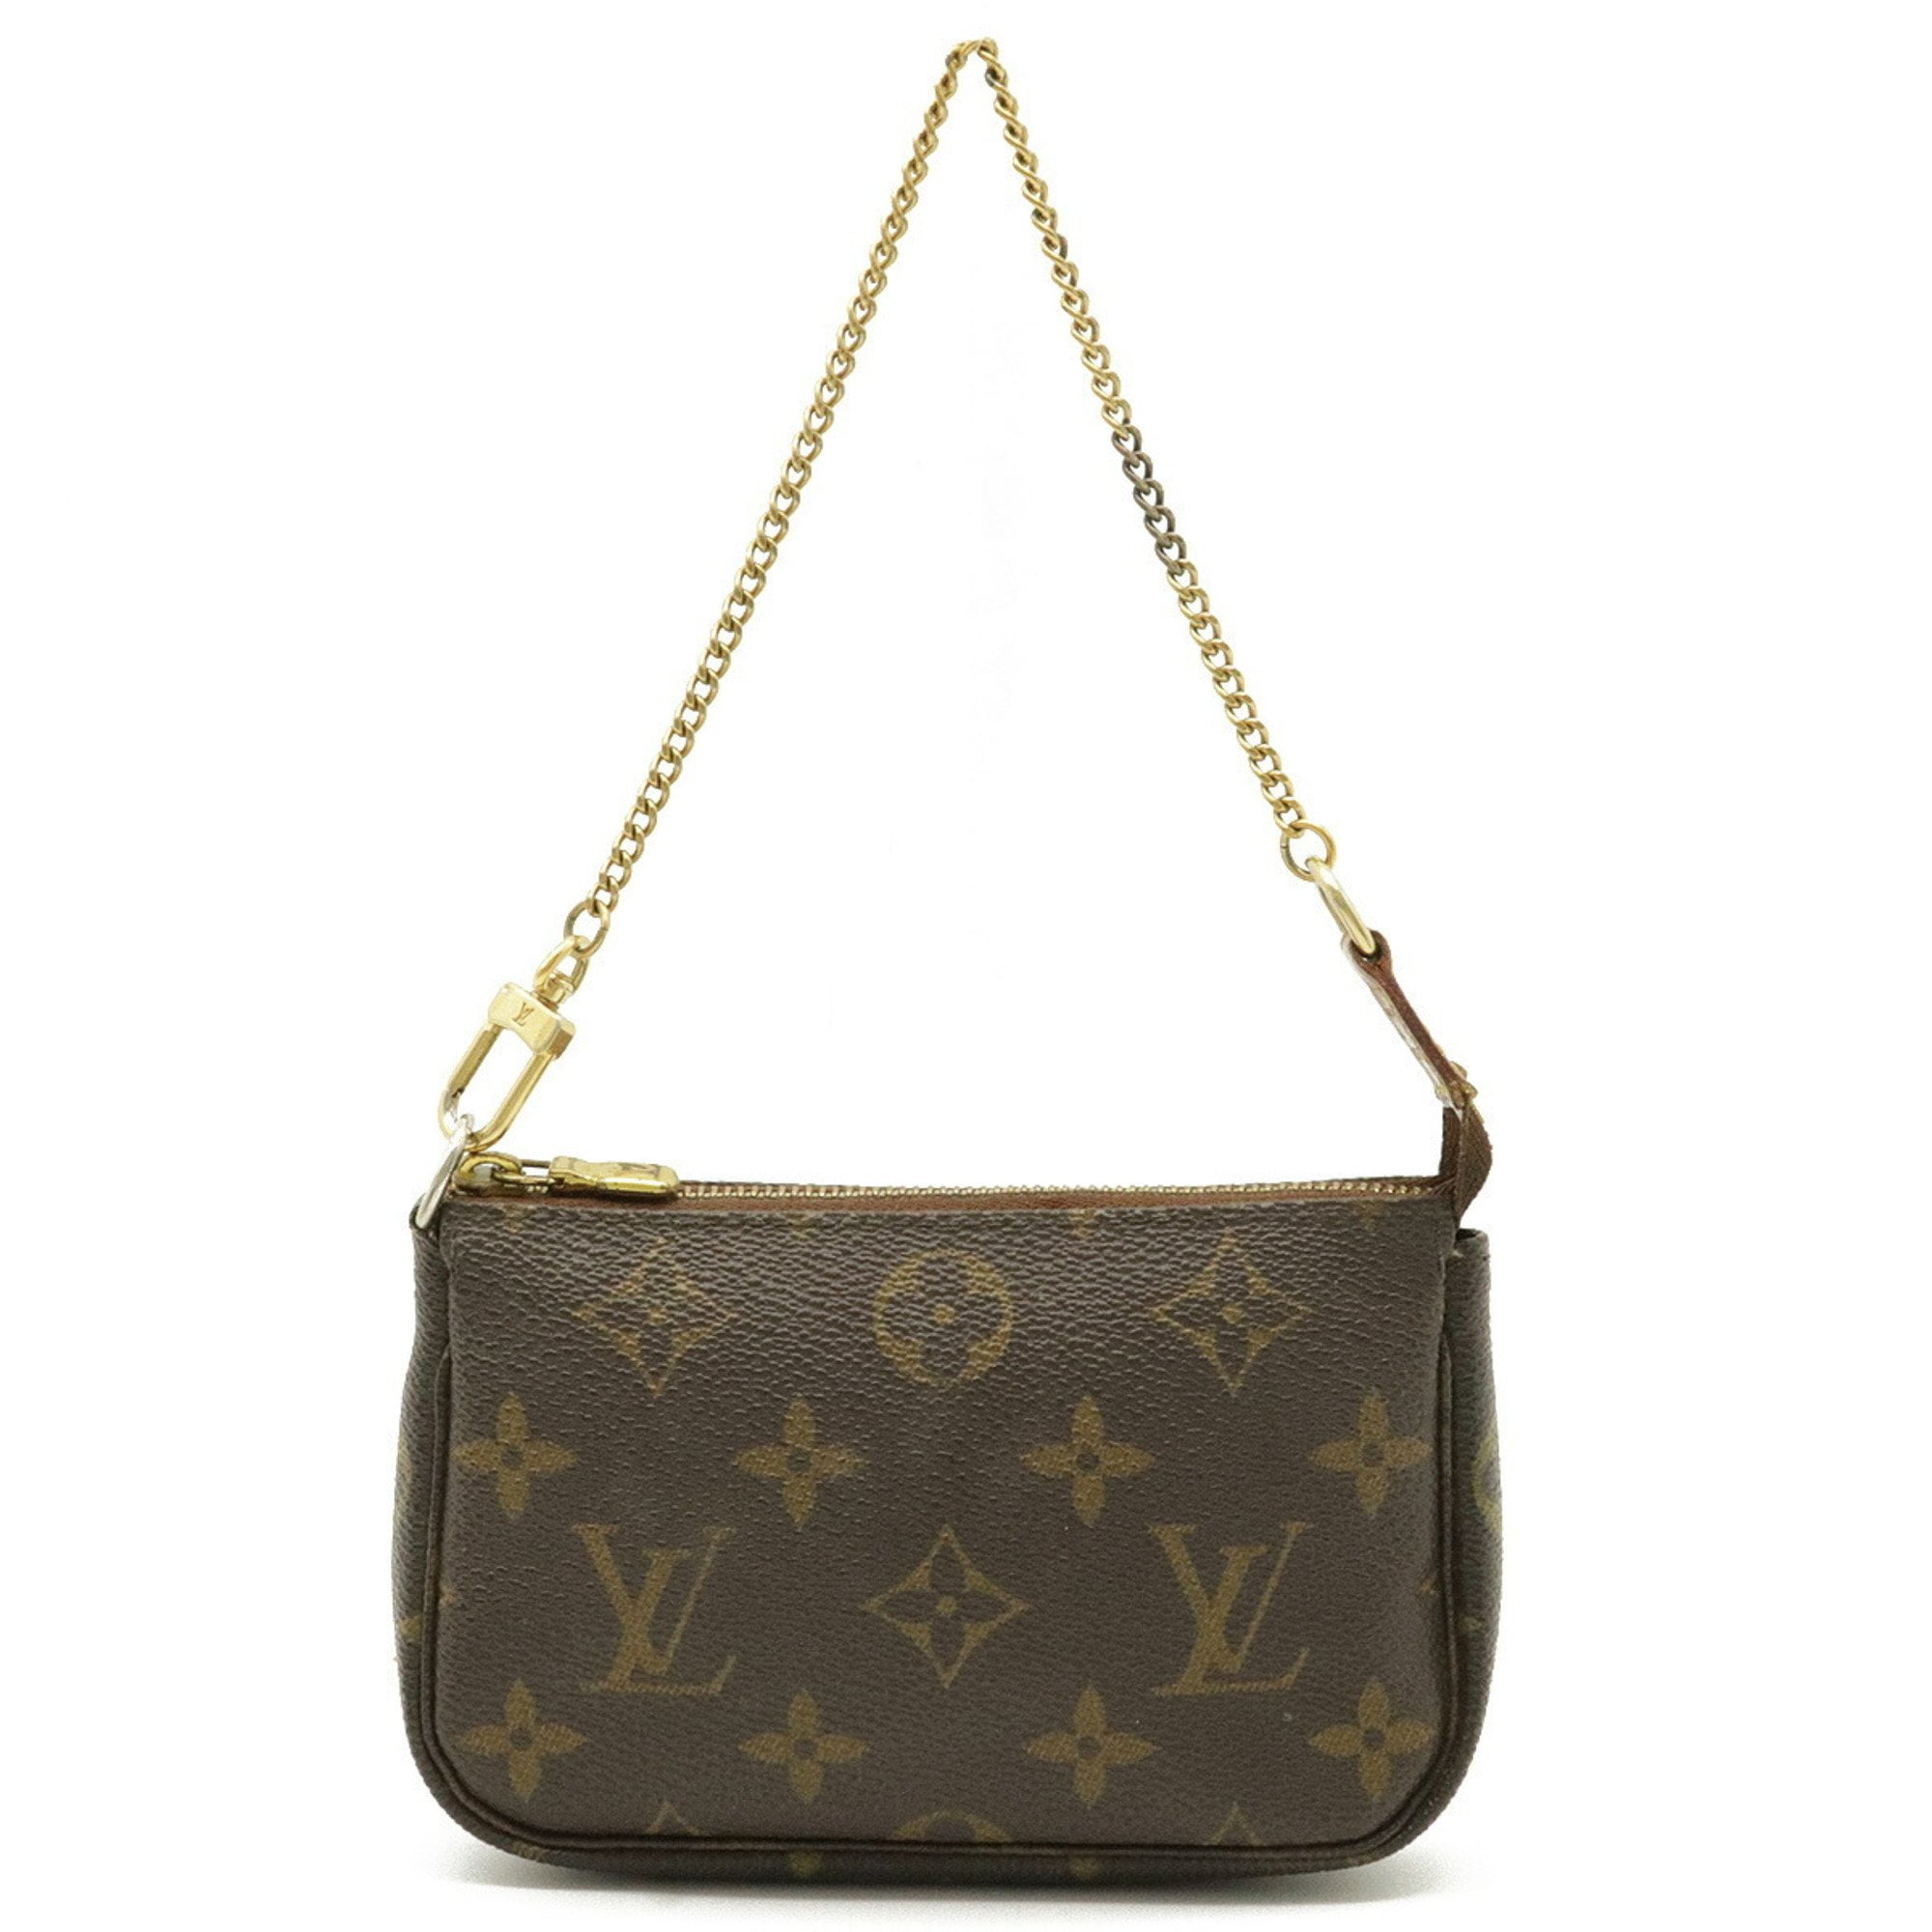 Best Place To Find Used Louis Vuitton Bags Cheapest Ive Found